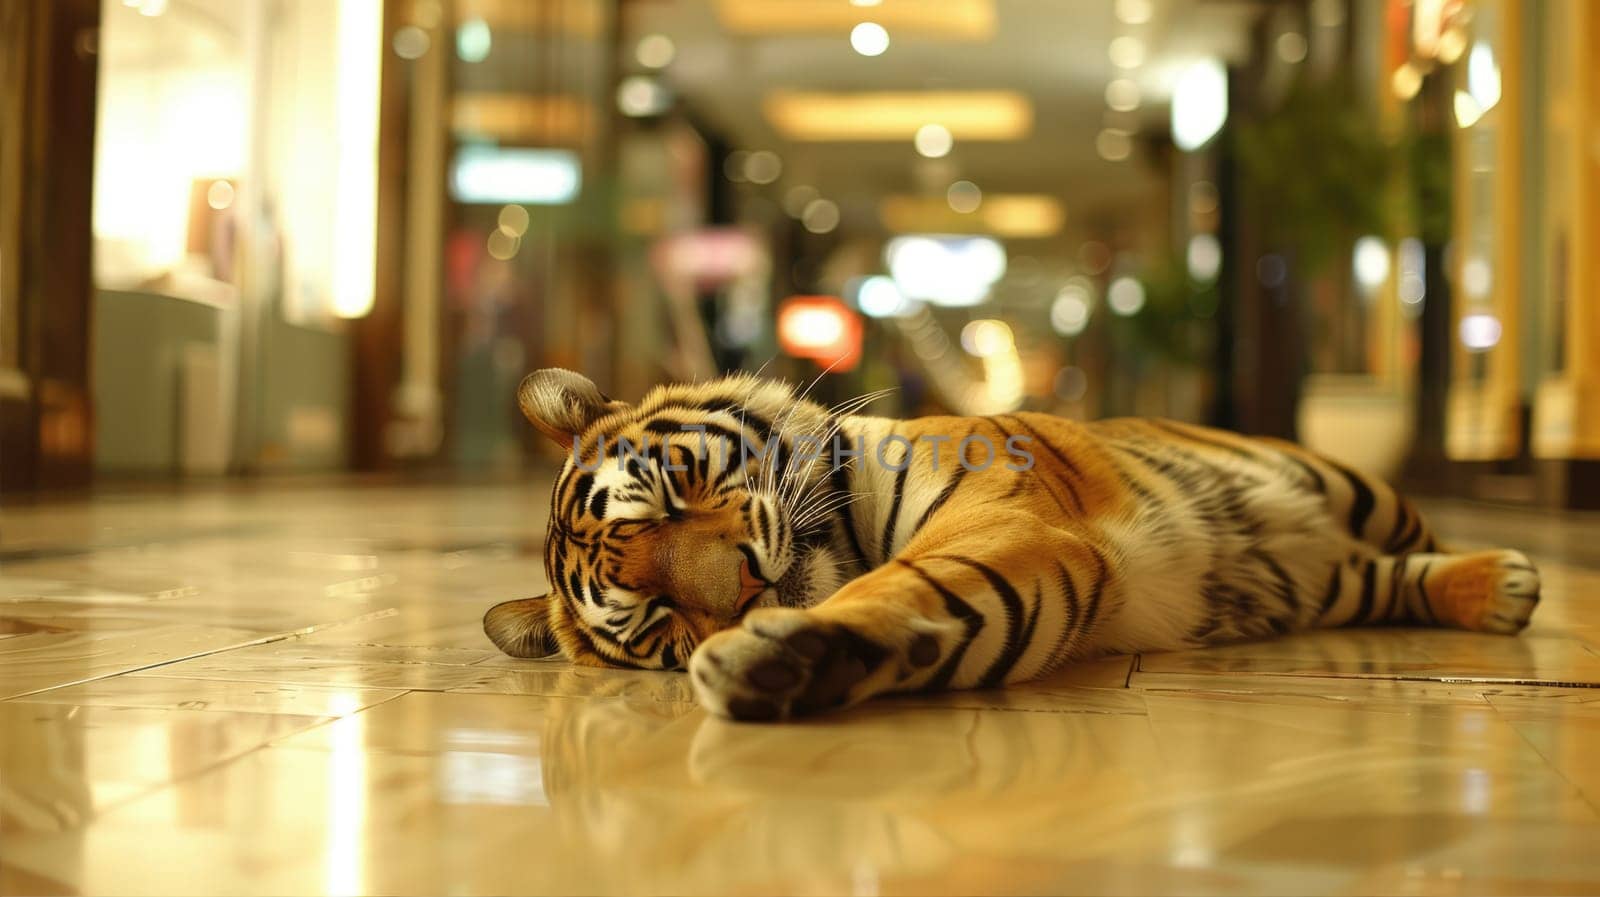 Bengal tiger is resting in a mall. by natali_brill